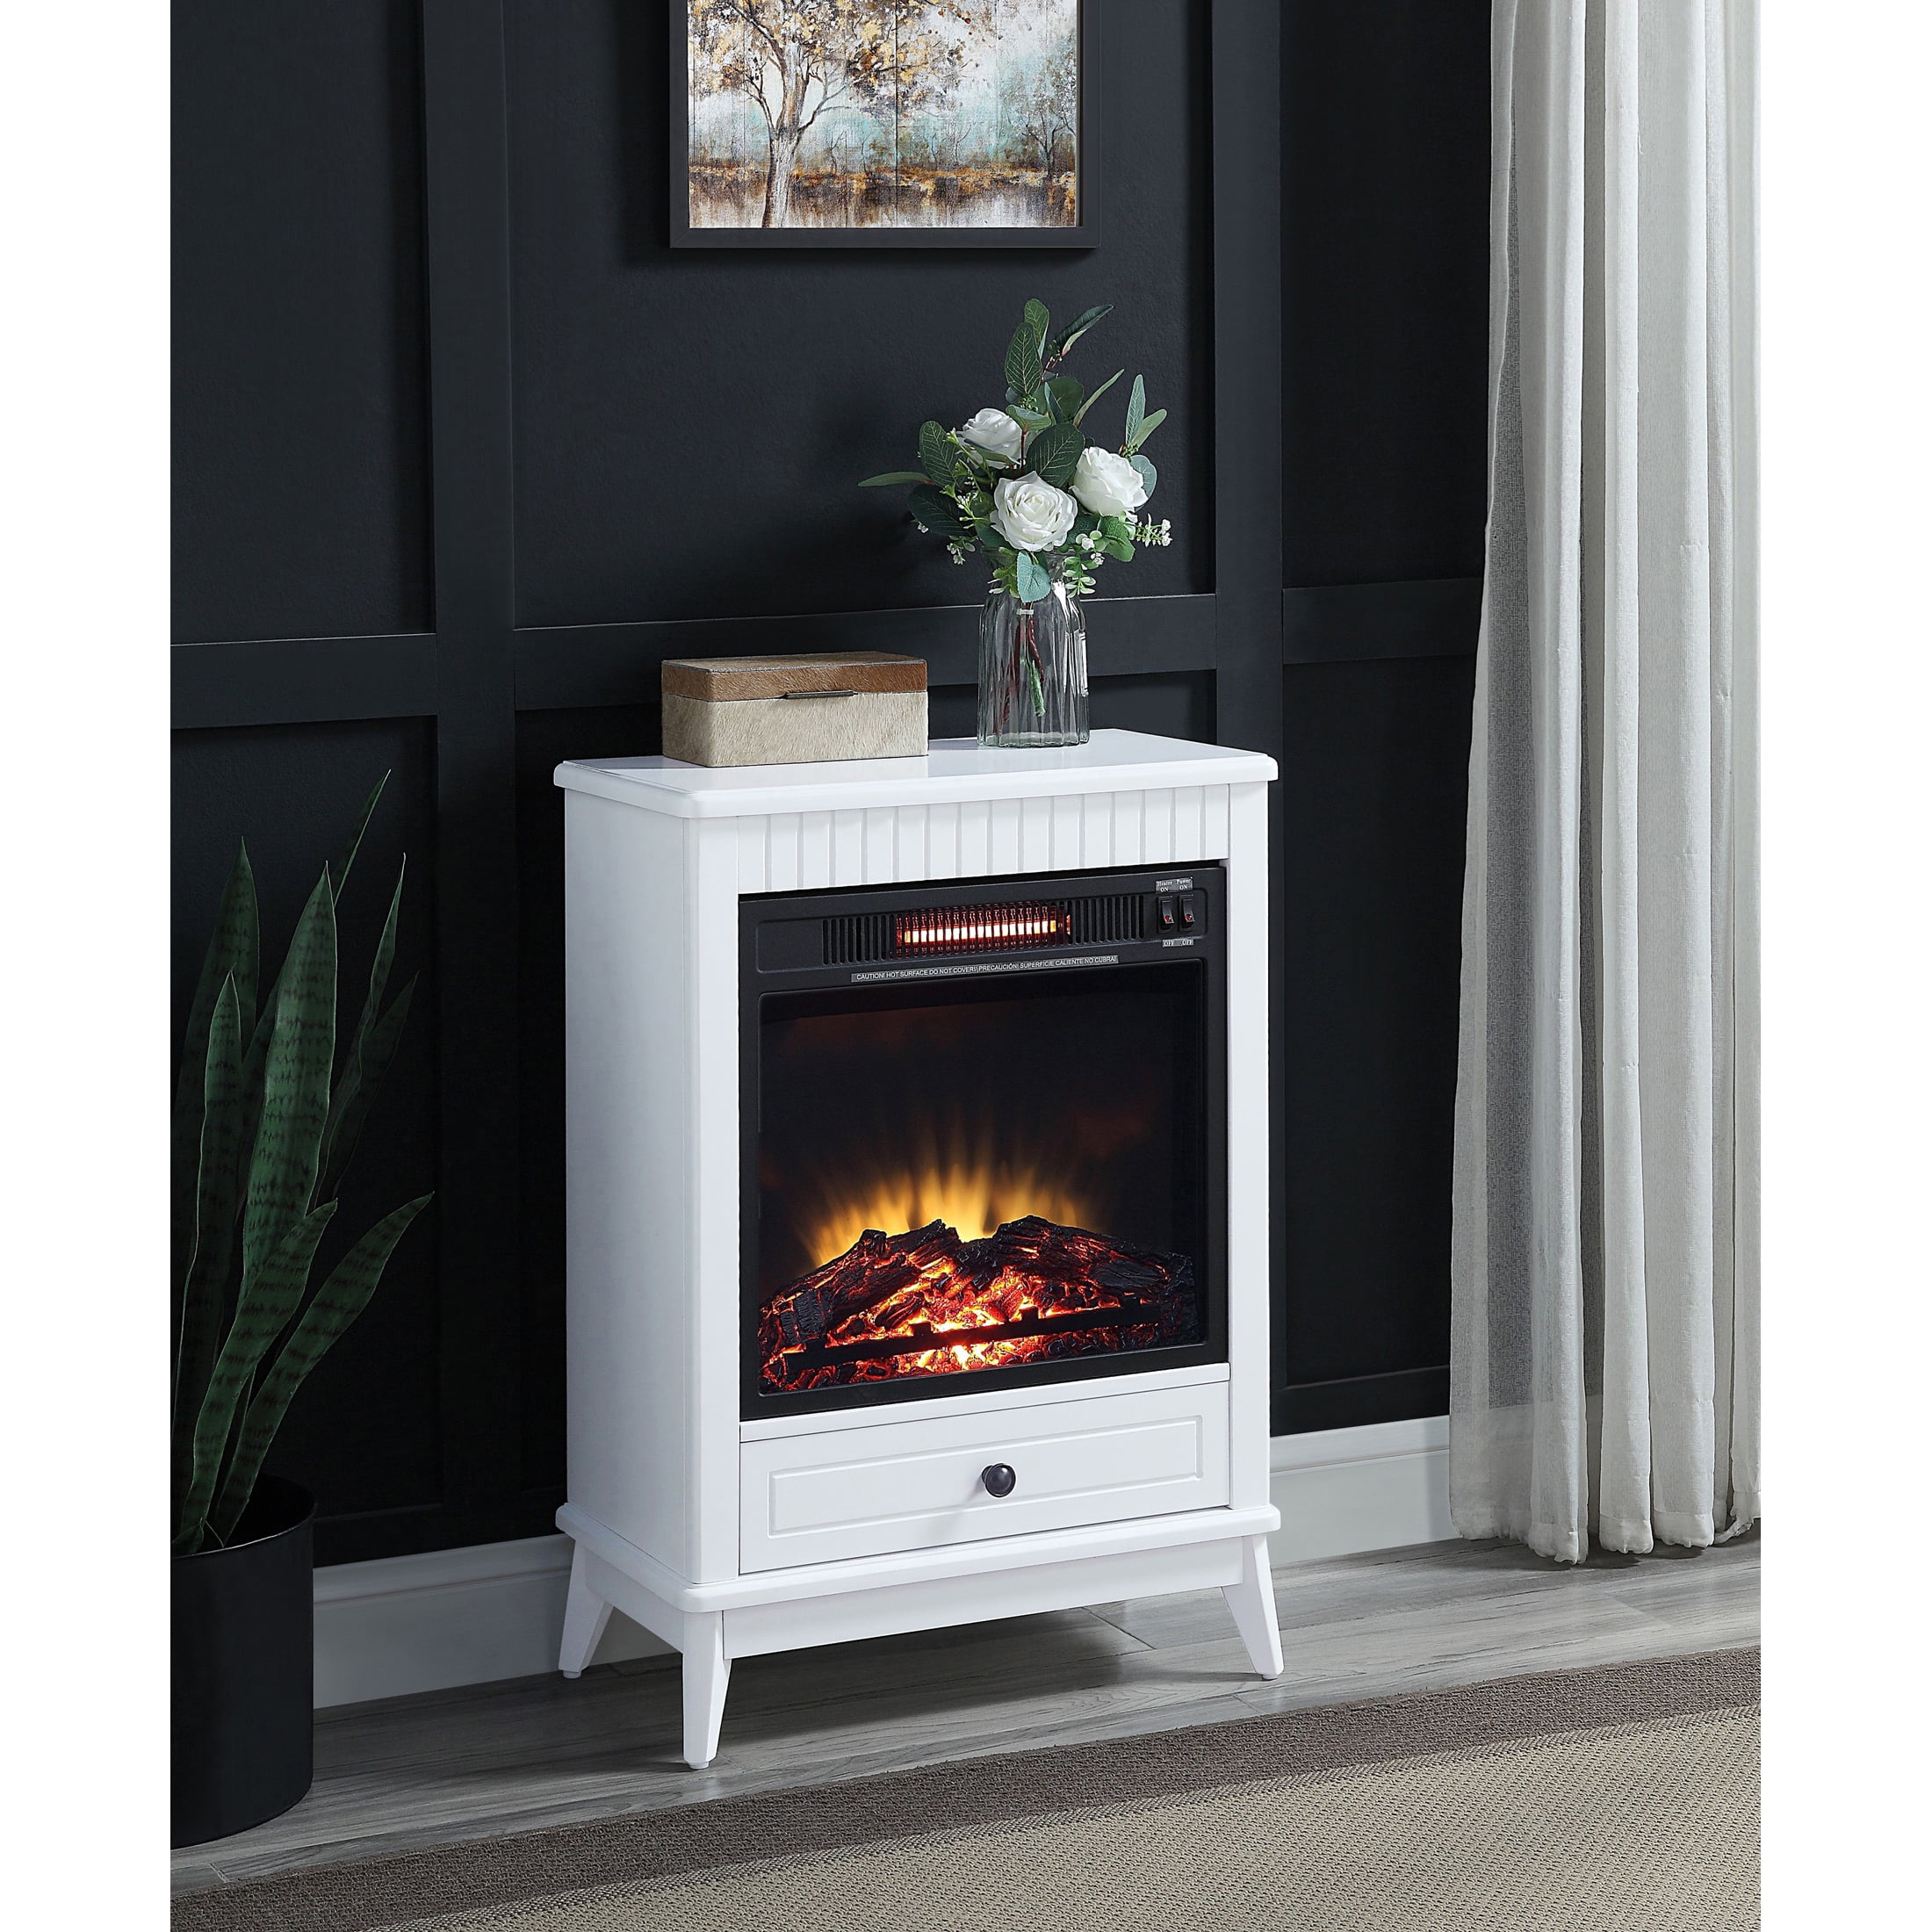 Picture of Acme Furniture AC00850 22 x 13 x 32 in. Hamish Fireplace, White